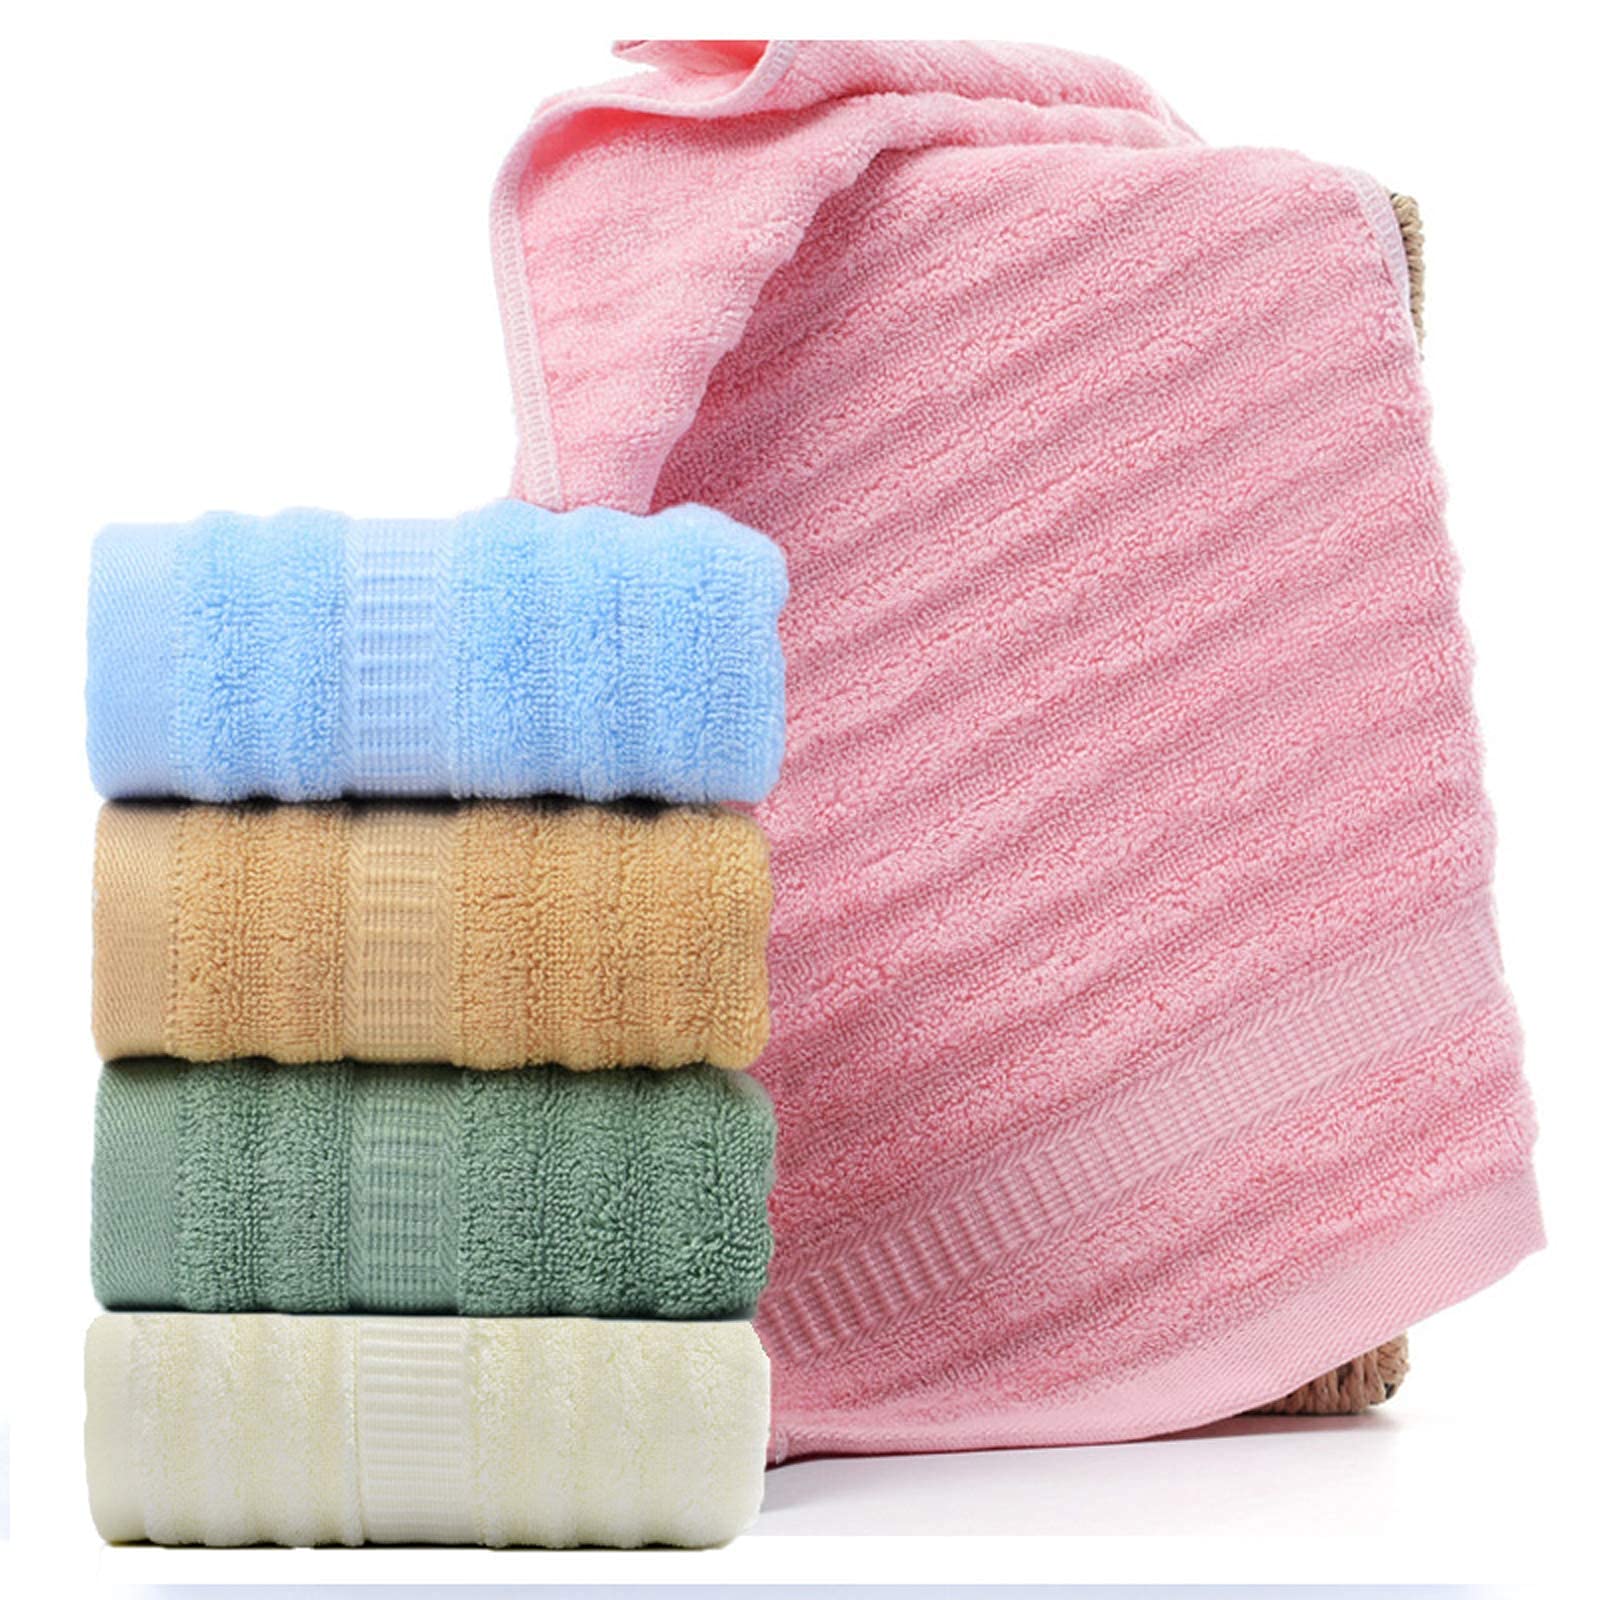 Mush Bamboo Hand Towel Set of 2 | 100% Bamboo | Ultra Soft, Absorbent & Quick Dry Towel for Daily use. Gym, Pool, Travel, Sports and Yoga | 75 X 35 cms | 600 GSM (Green & Pink)